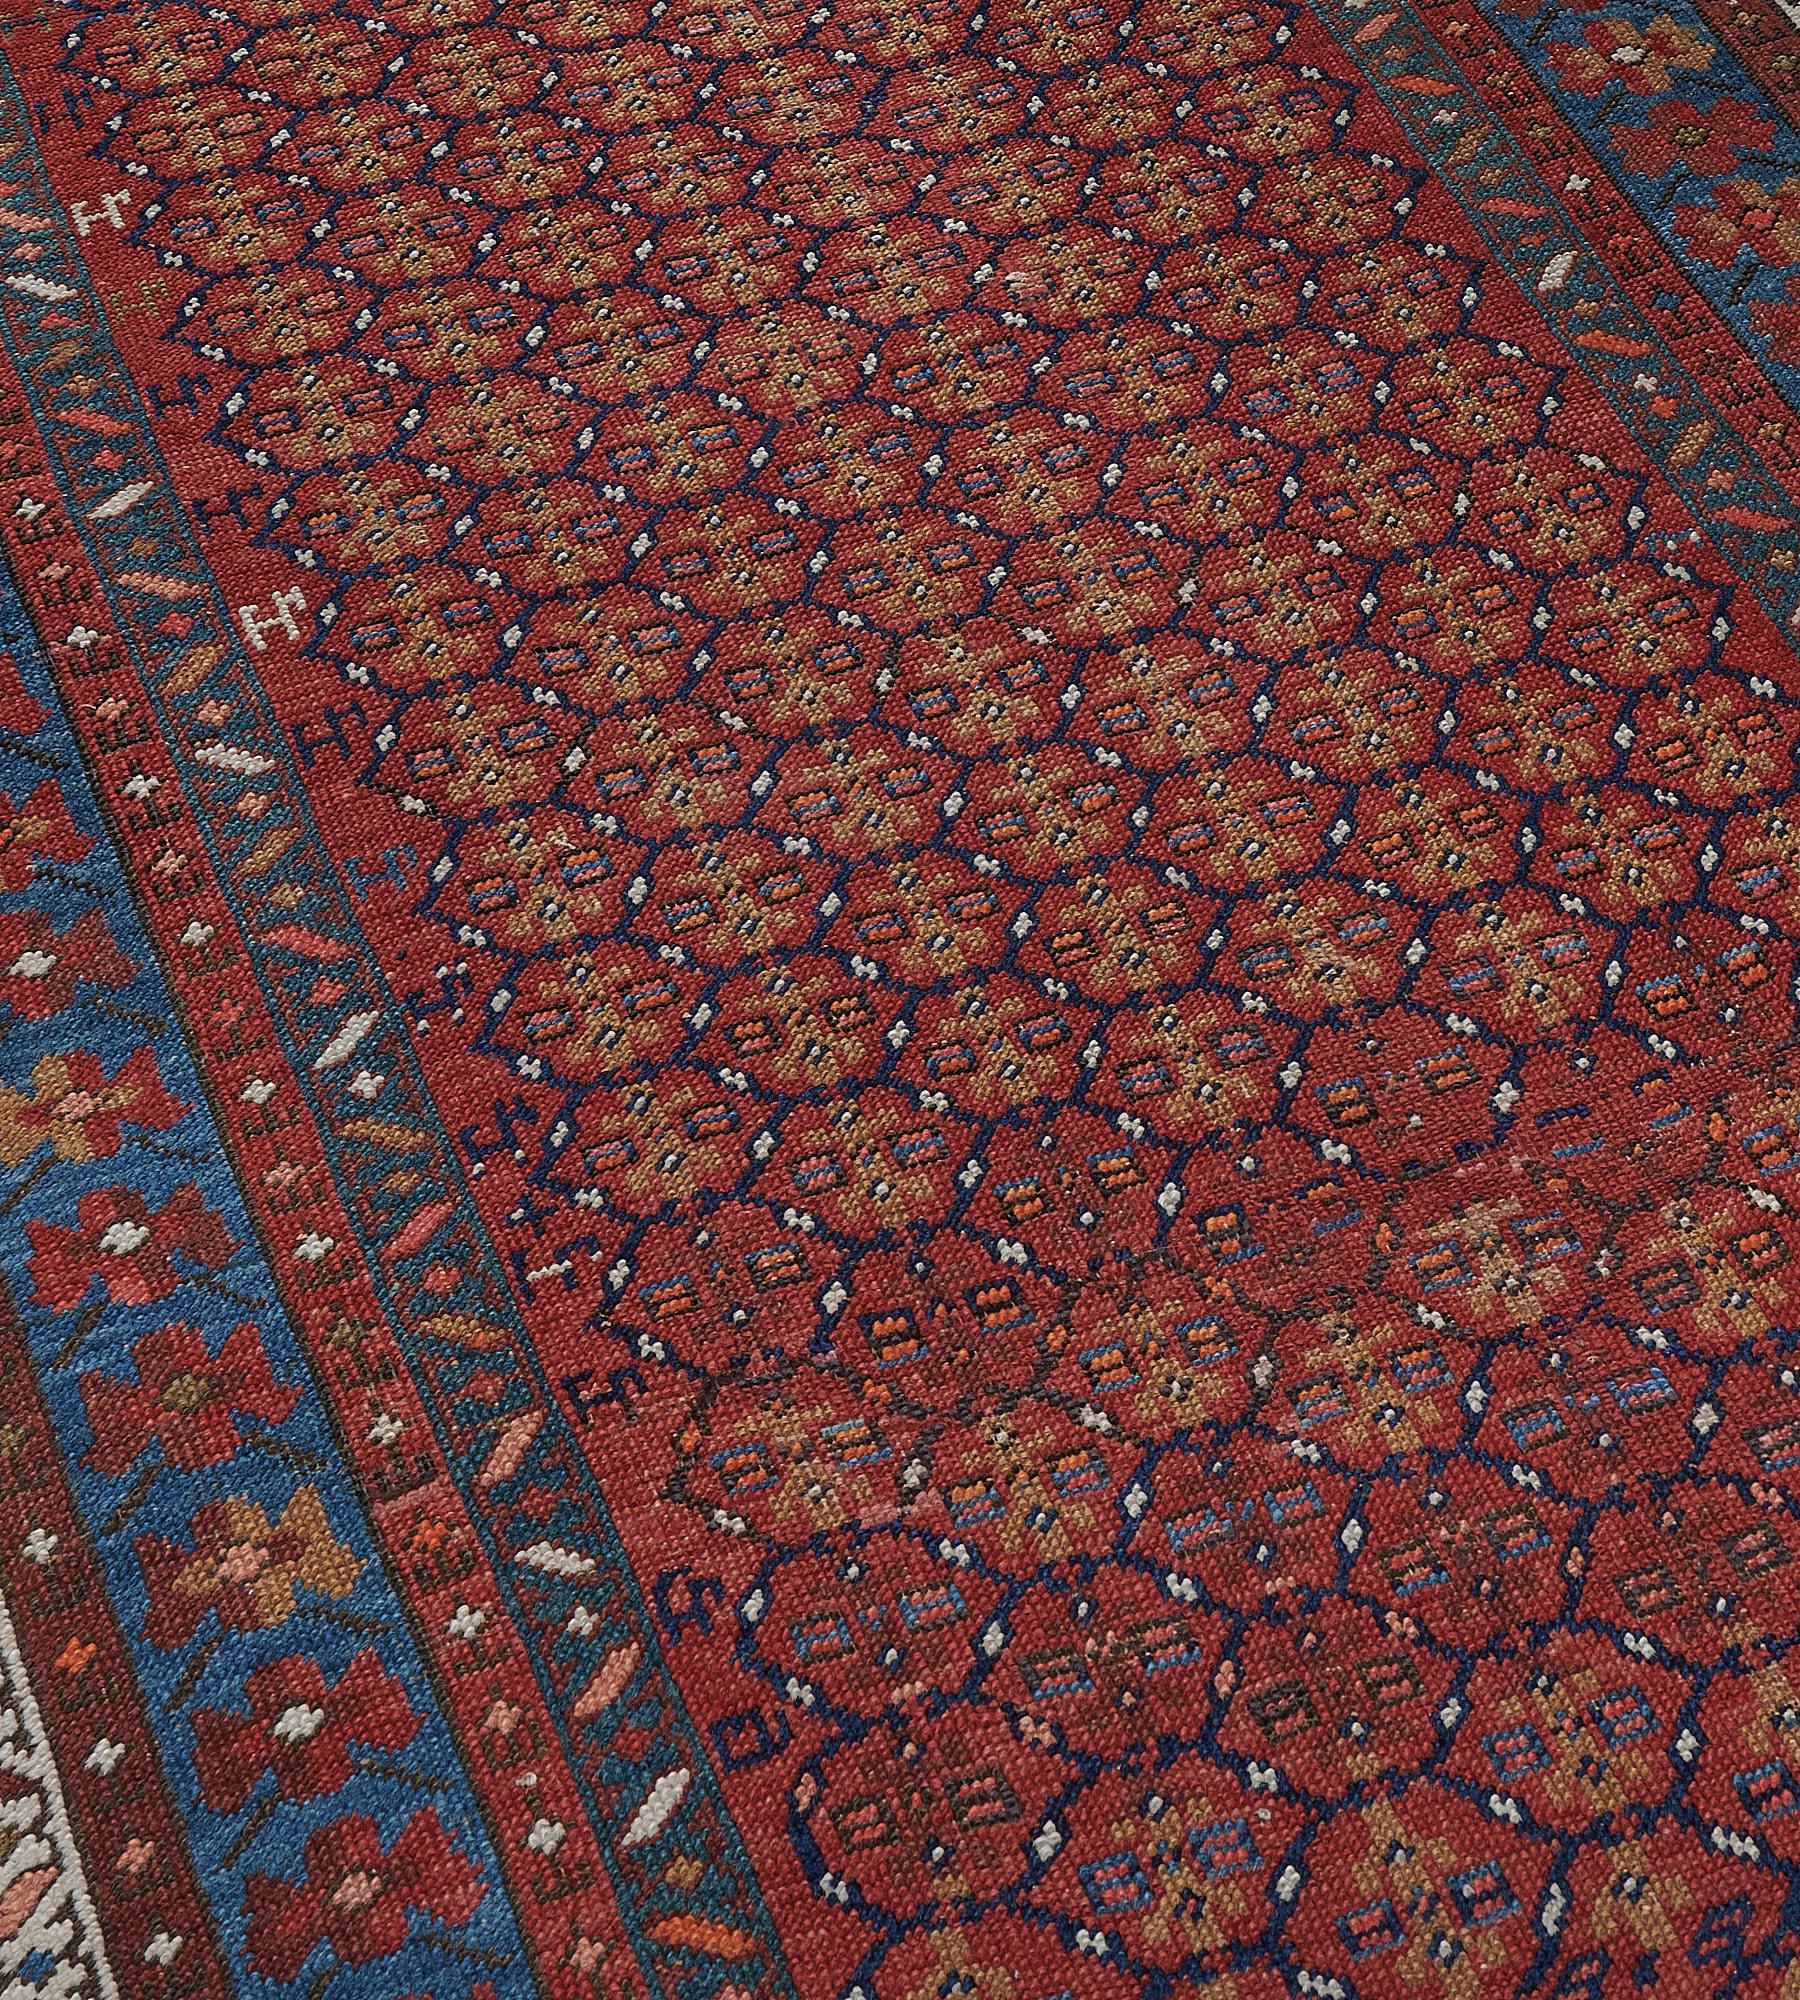 This antique rug has a tomato-red field with an overall design of linked indigo-blue lozenges, each containing a pair of polychrome square lozenges around a central sandy-brown angular floral stem, stylized animals at each side, in a light blue